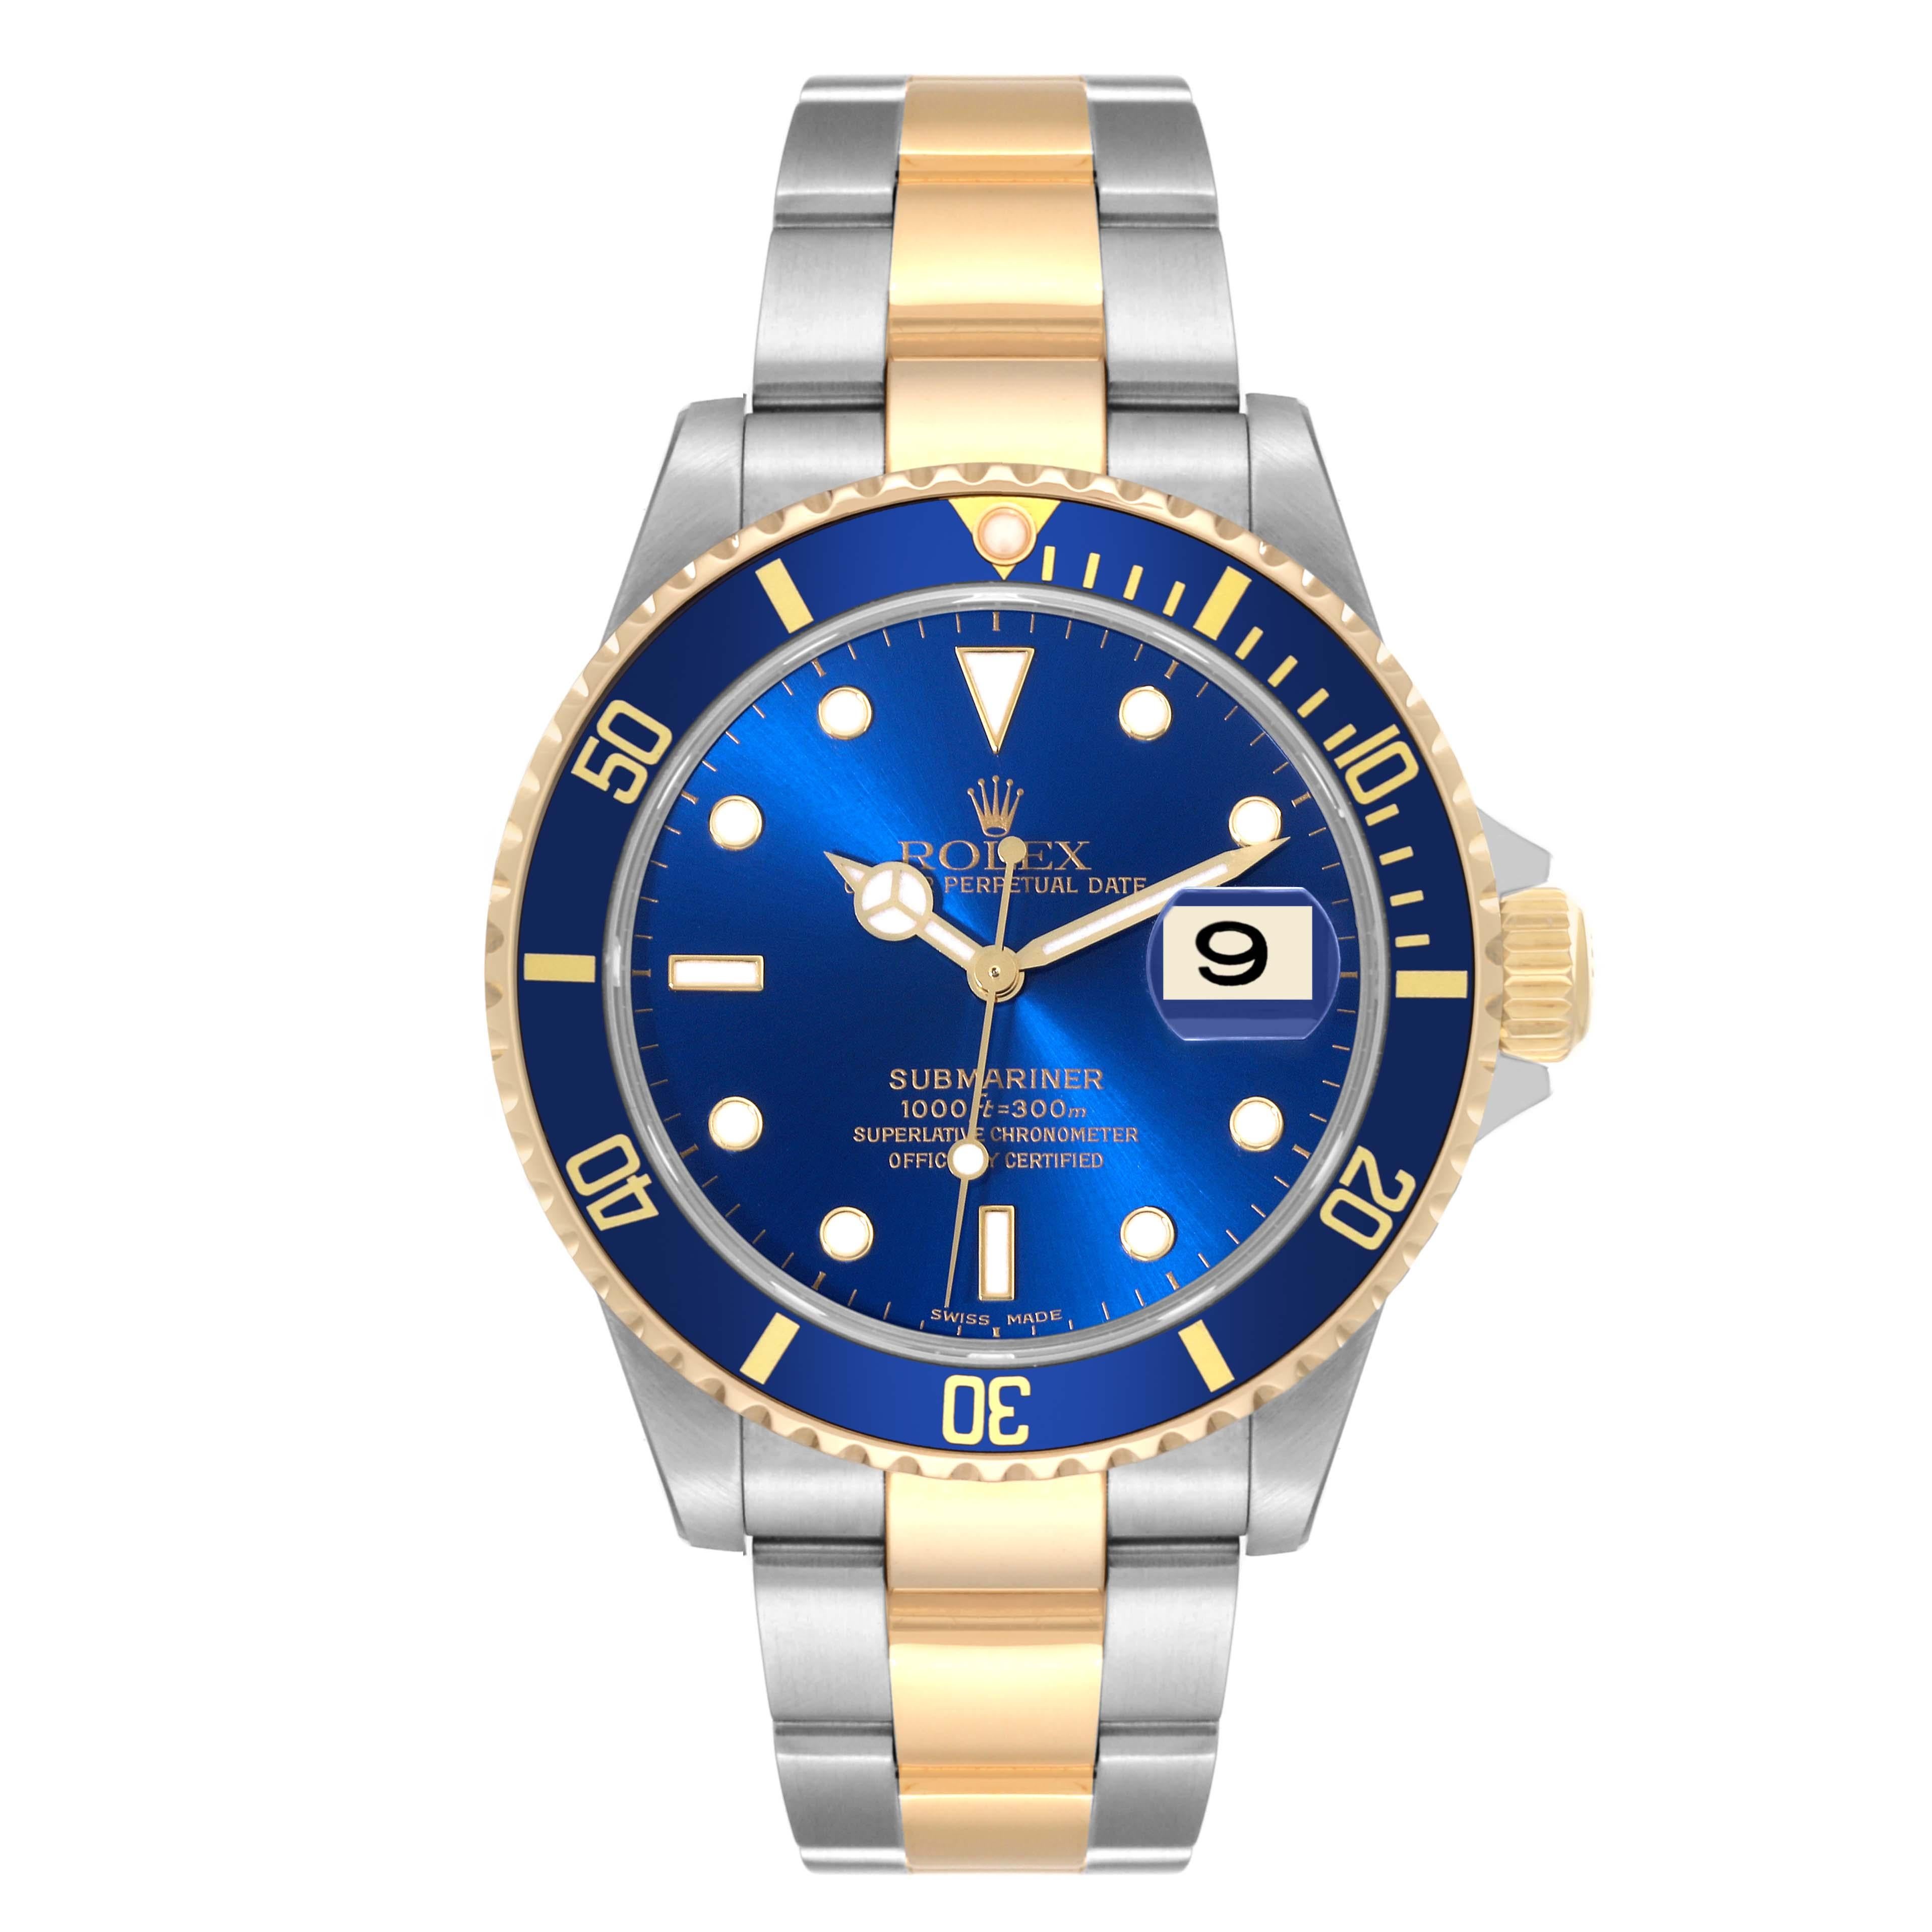 Rolex Submariner Blue Dial Steel Yellow Gold Mens Watch 16613. Officially certified chronometer automatic self-winding movement. Stainless steel and 18k yellow gold case 40 mm in diameter. Rolex logo on the crown. Blue insert special time-lapse